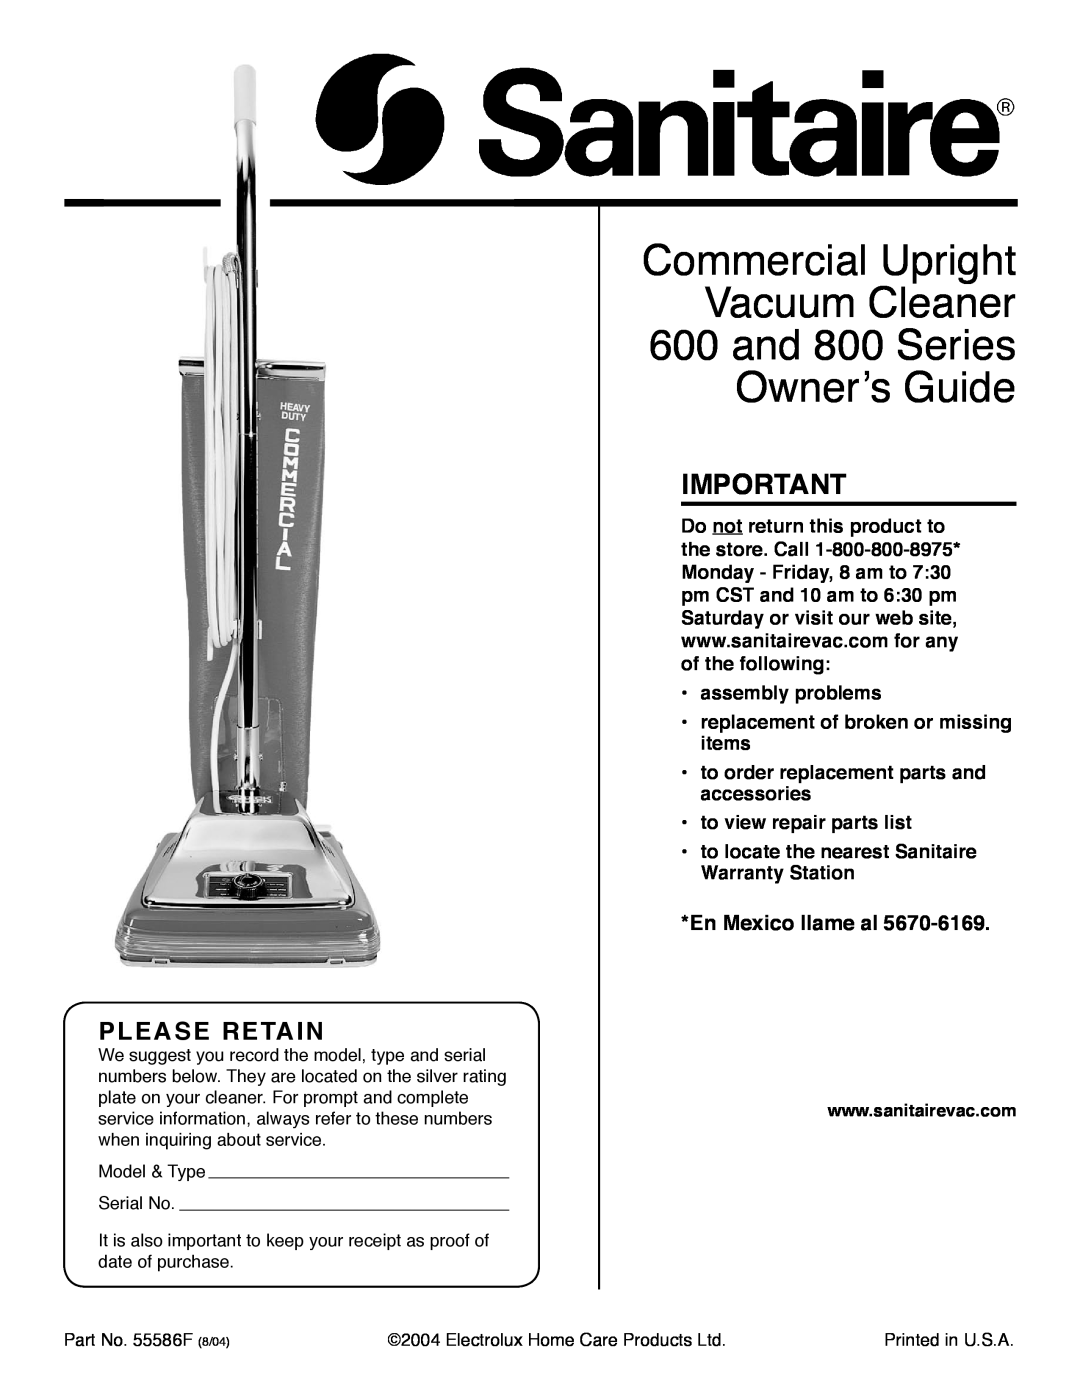 Sanitaire warranty Commercial Upright Vacuum Cleaner 800 Series, Owner’s Guide, Please Retain 